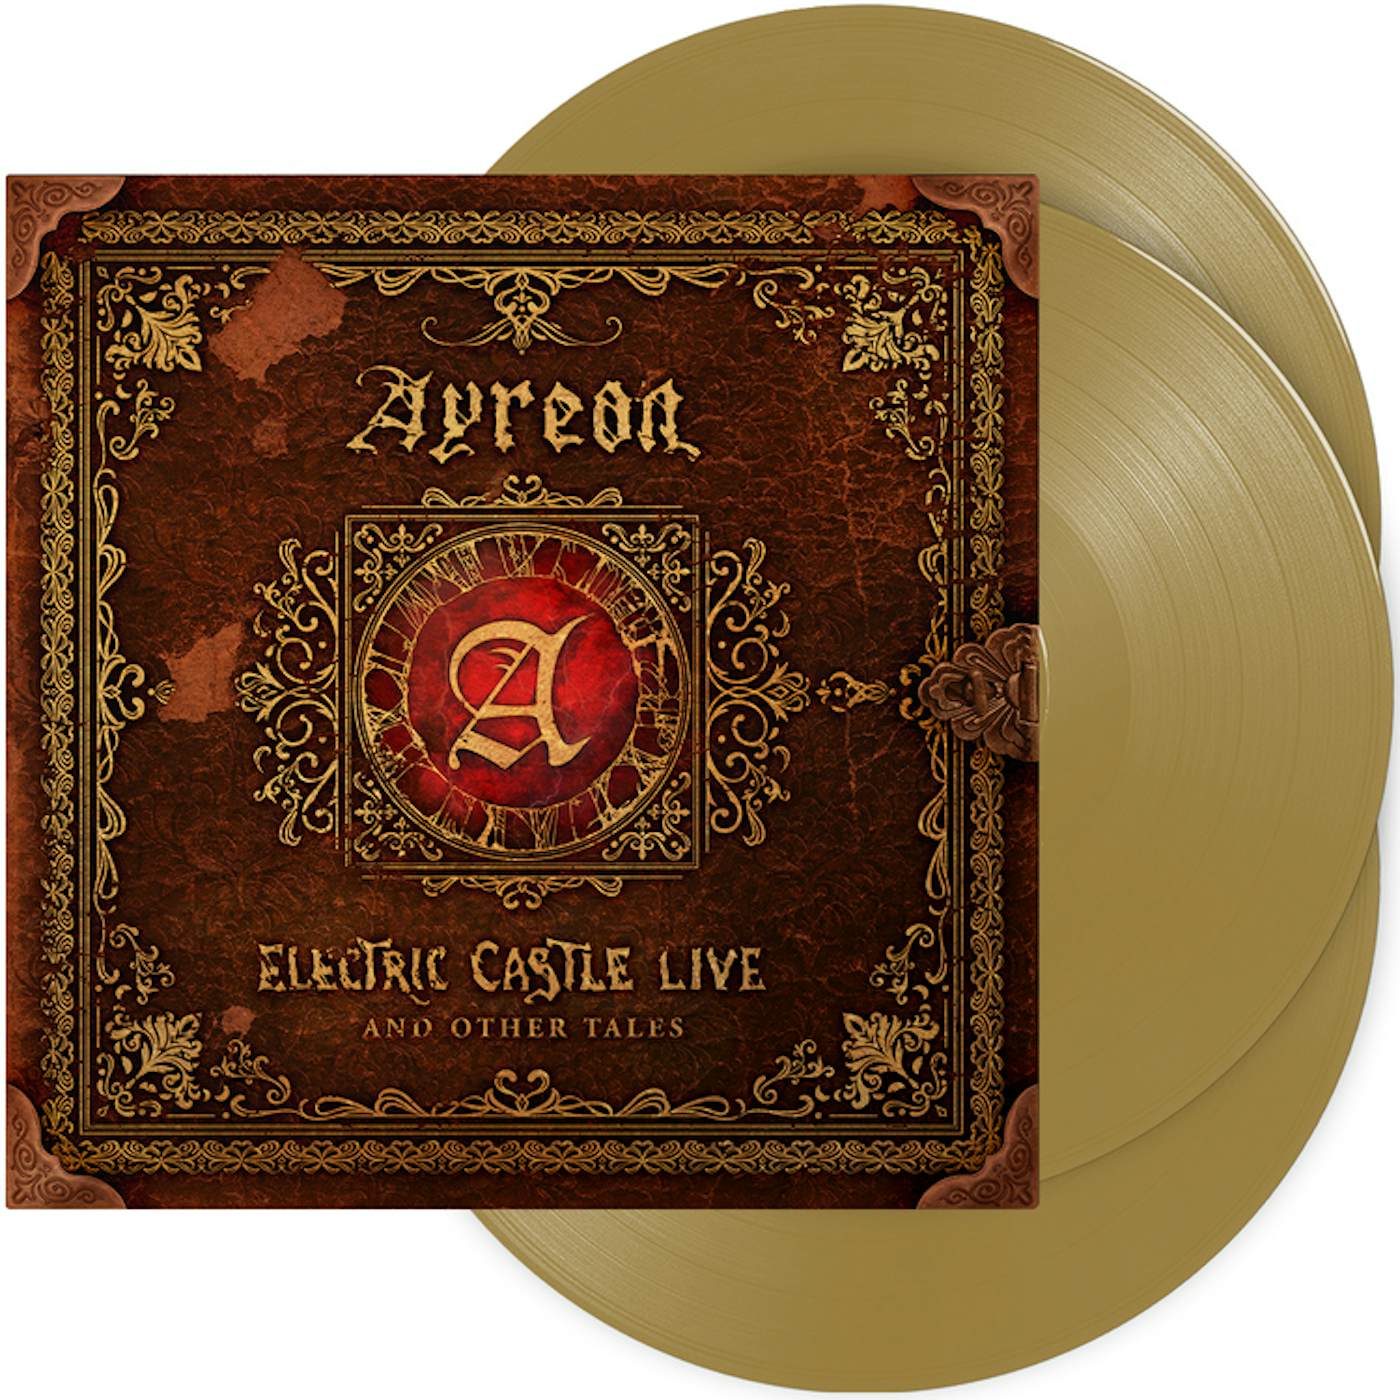 Ayreon ELECTRIC CASTLE LIVE & OTHER TALES (3LP) Vinyl Record